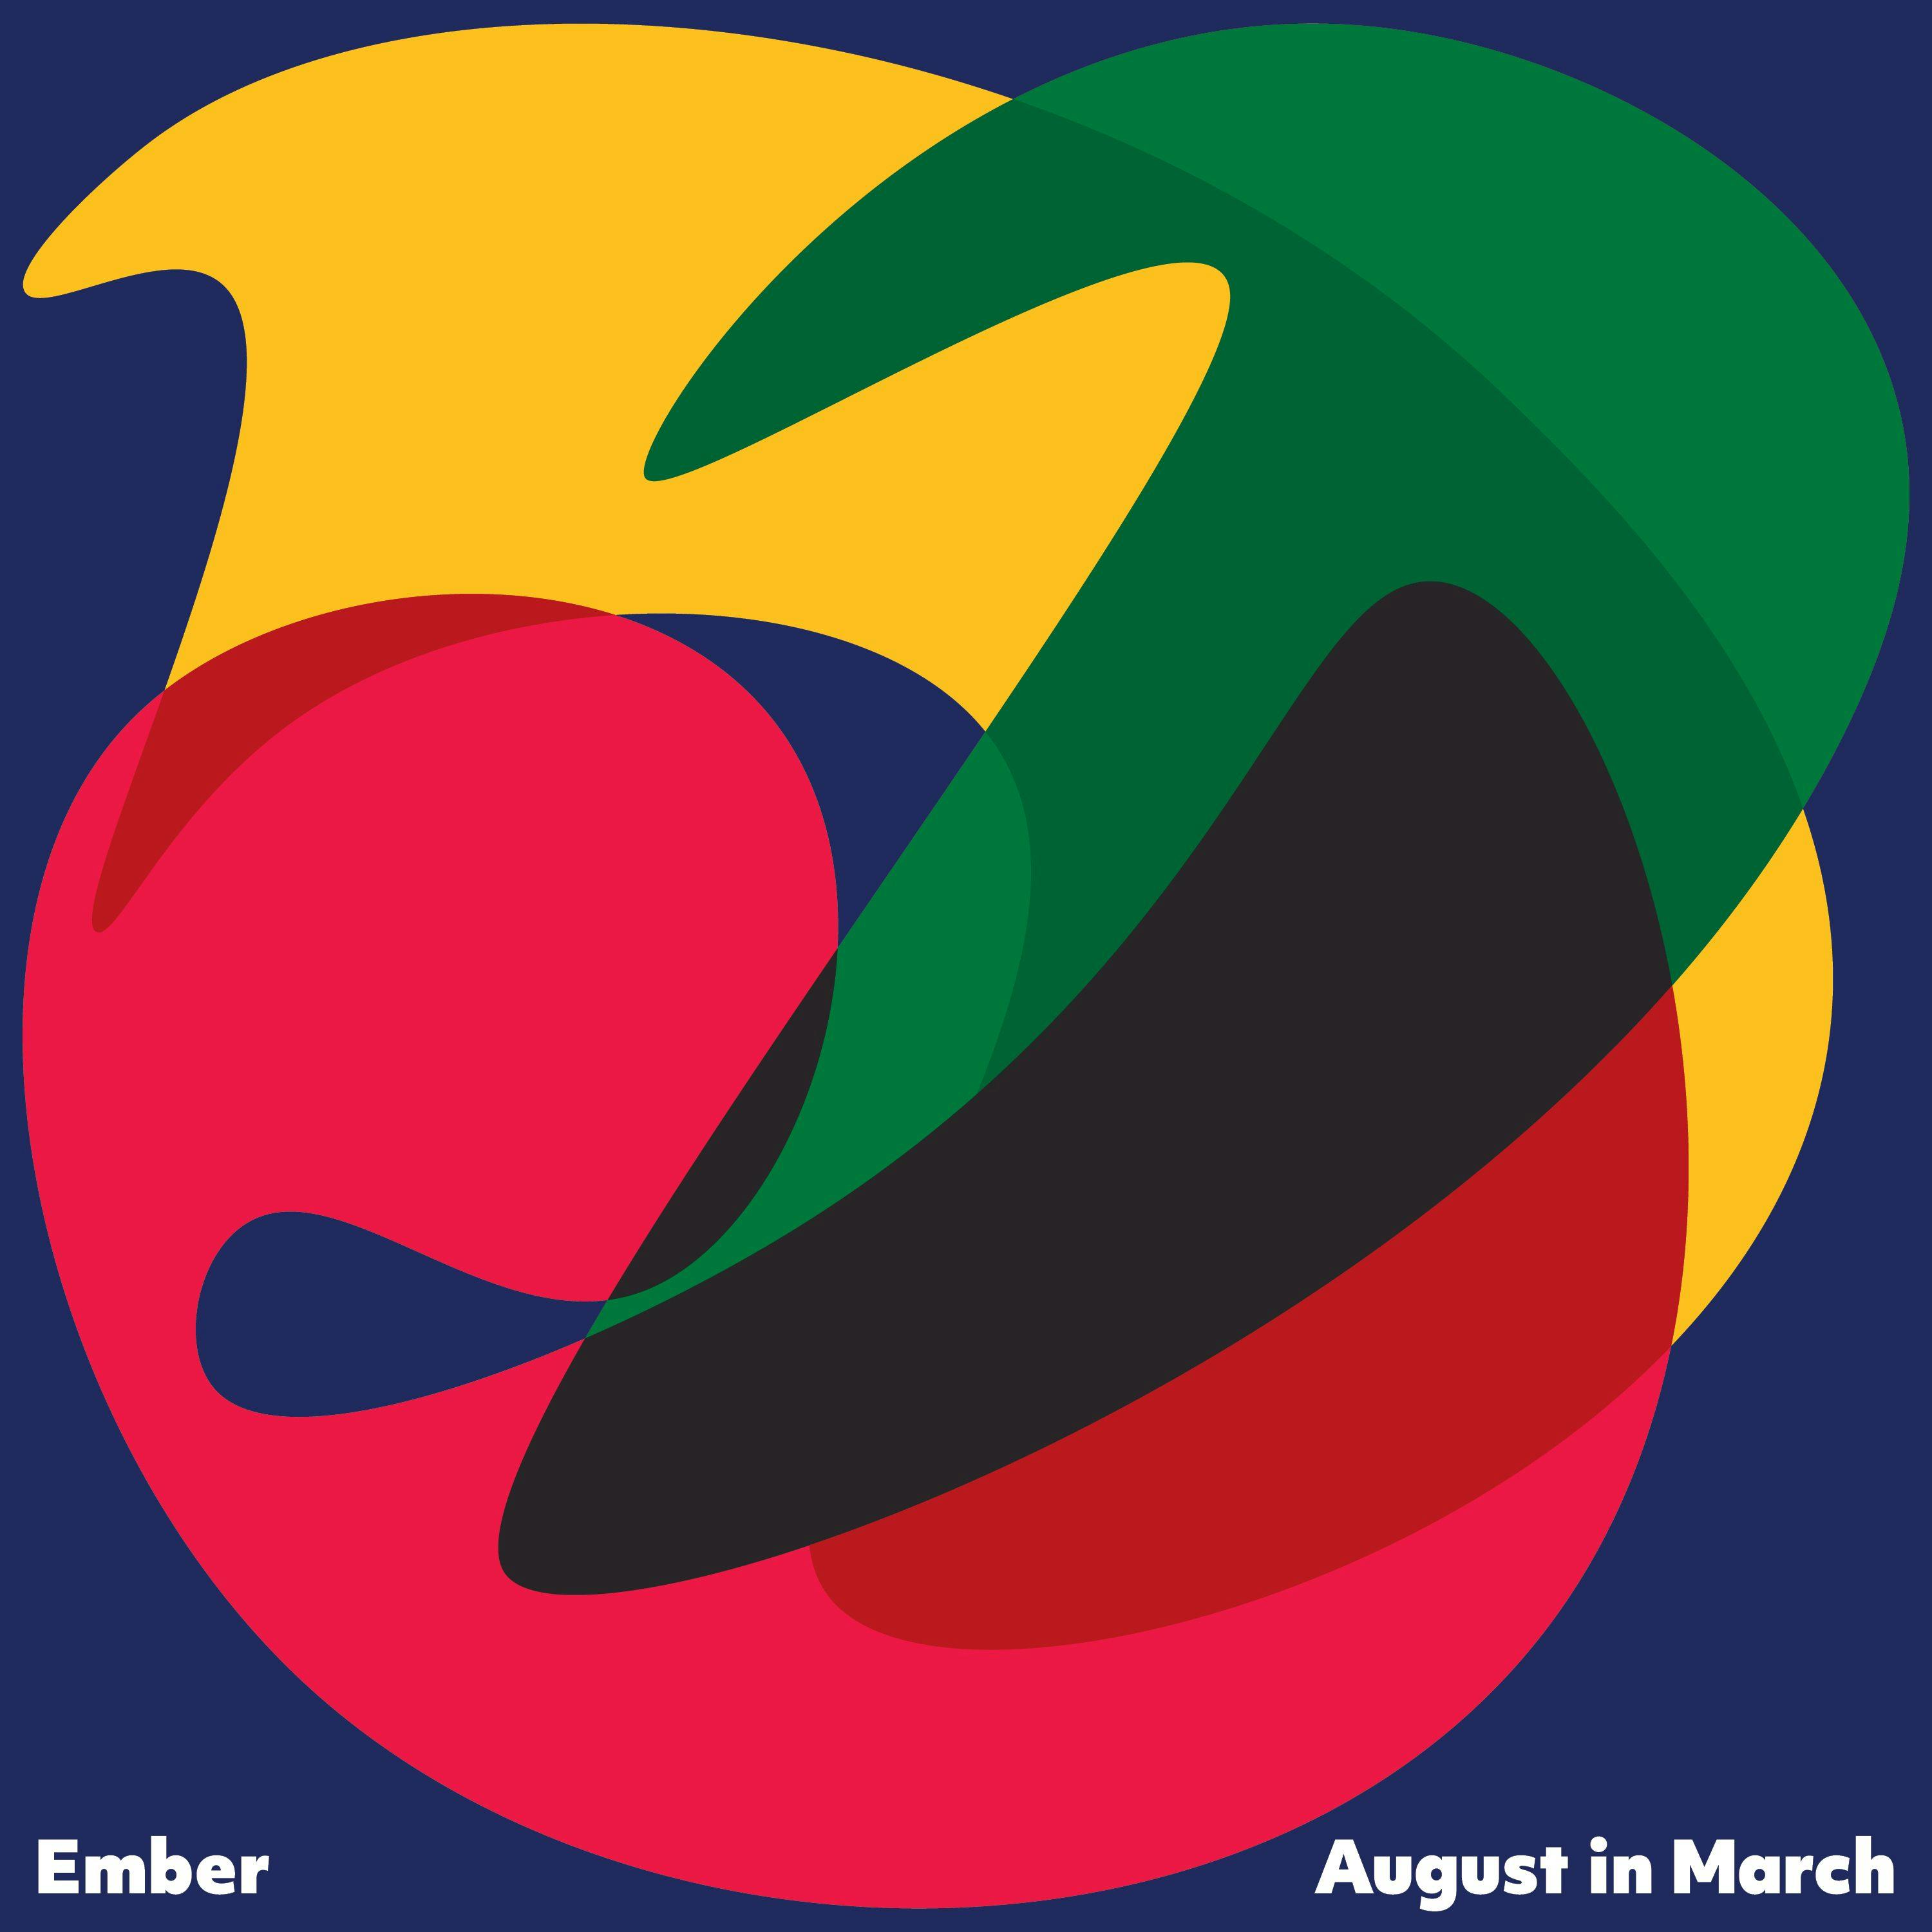 Ember's August in March album cover